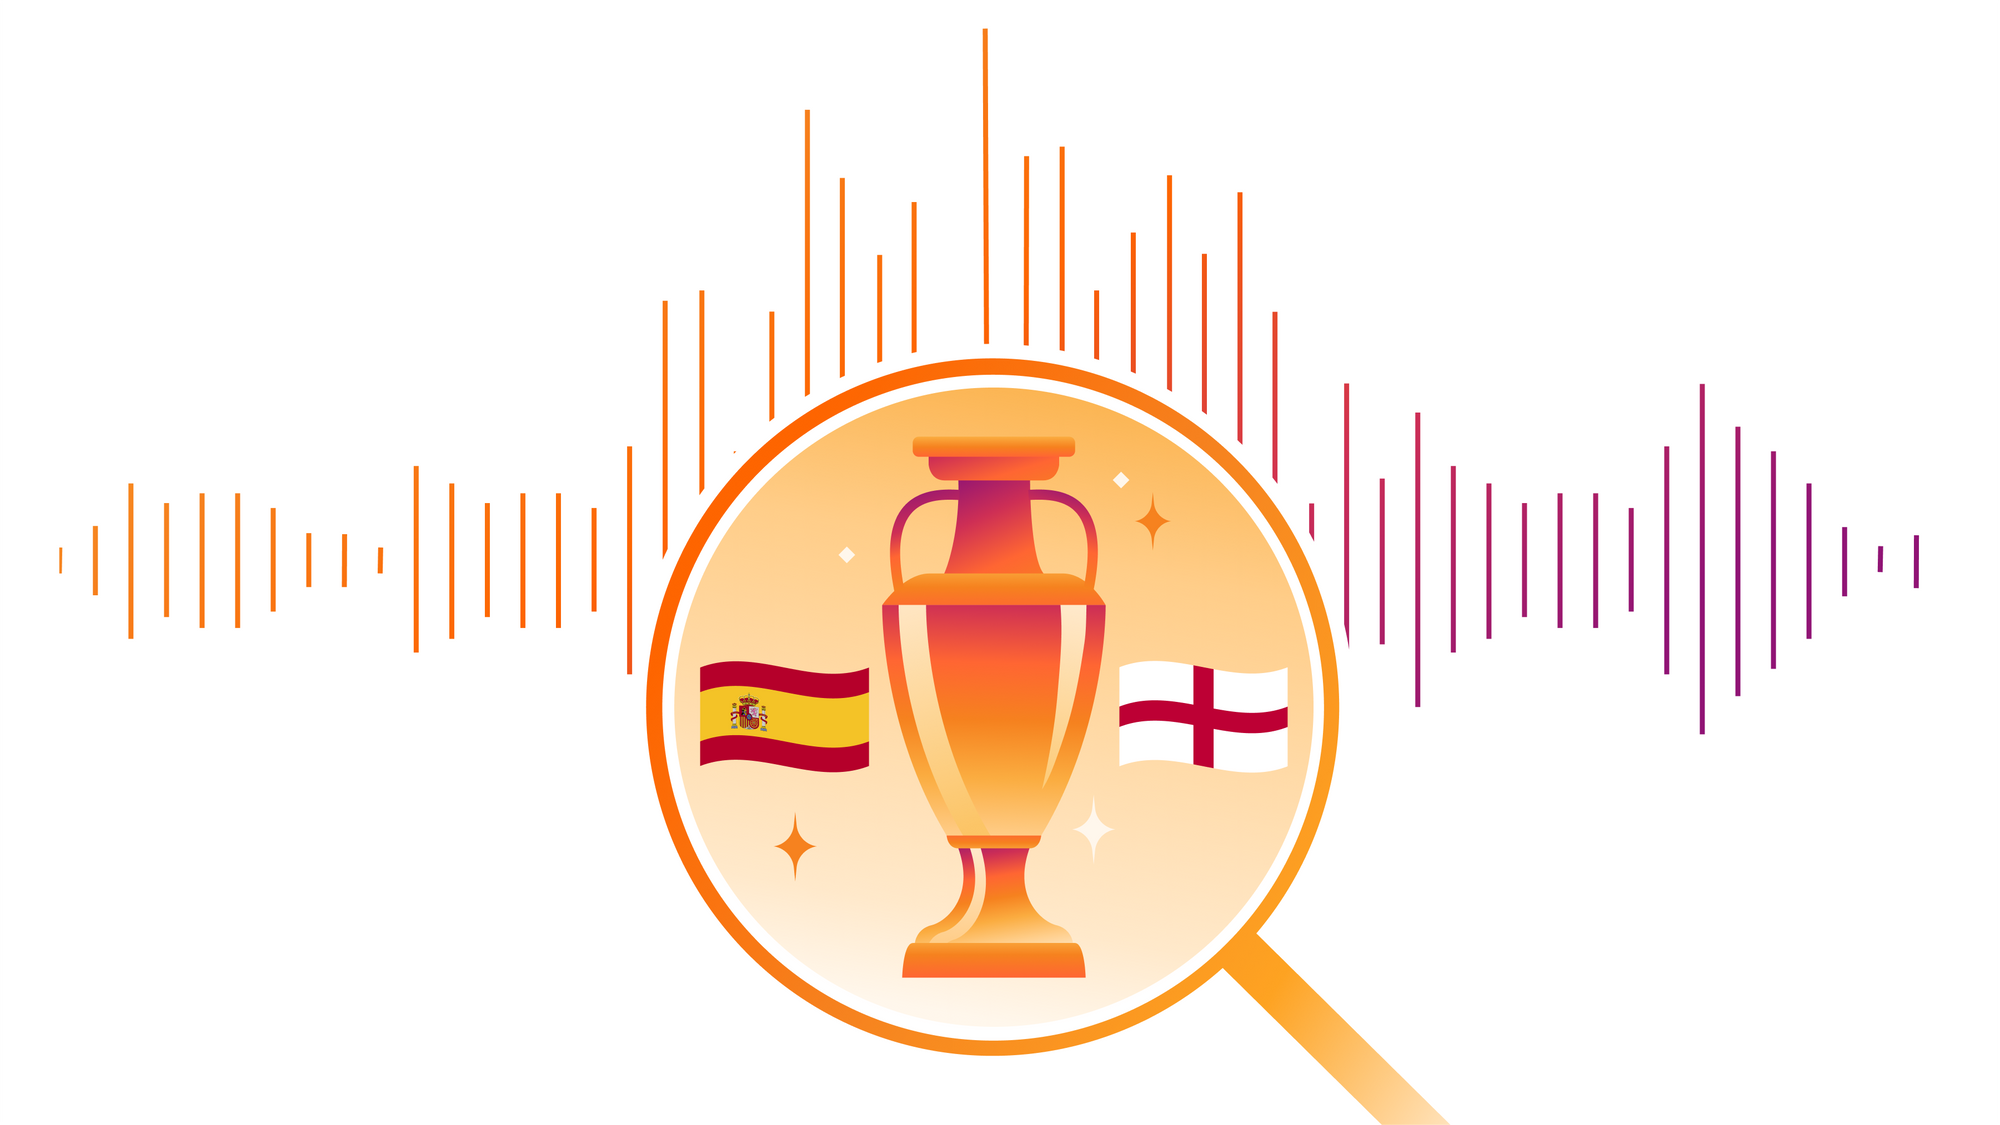 Euro 2024’s impact on Internet traffic: a closer look at finalists Spain and England